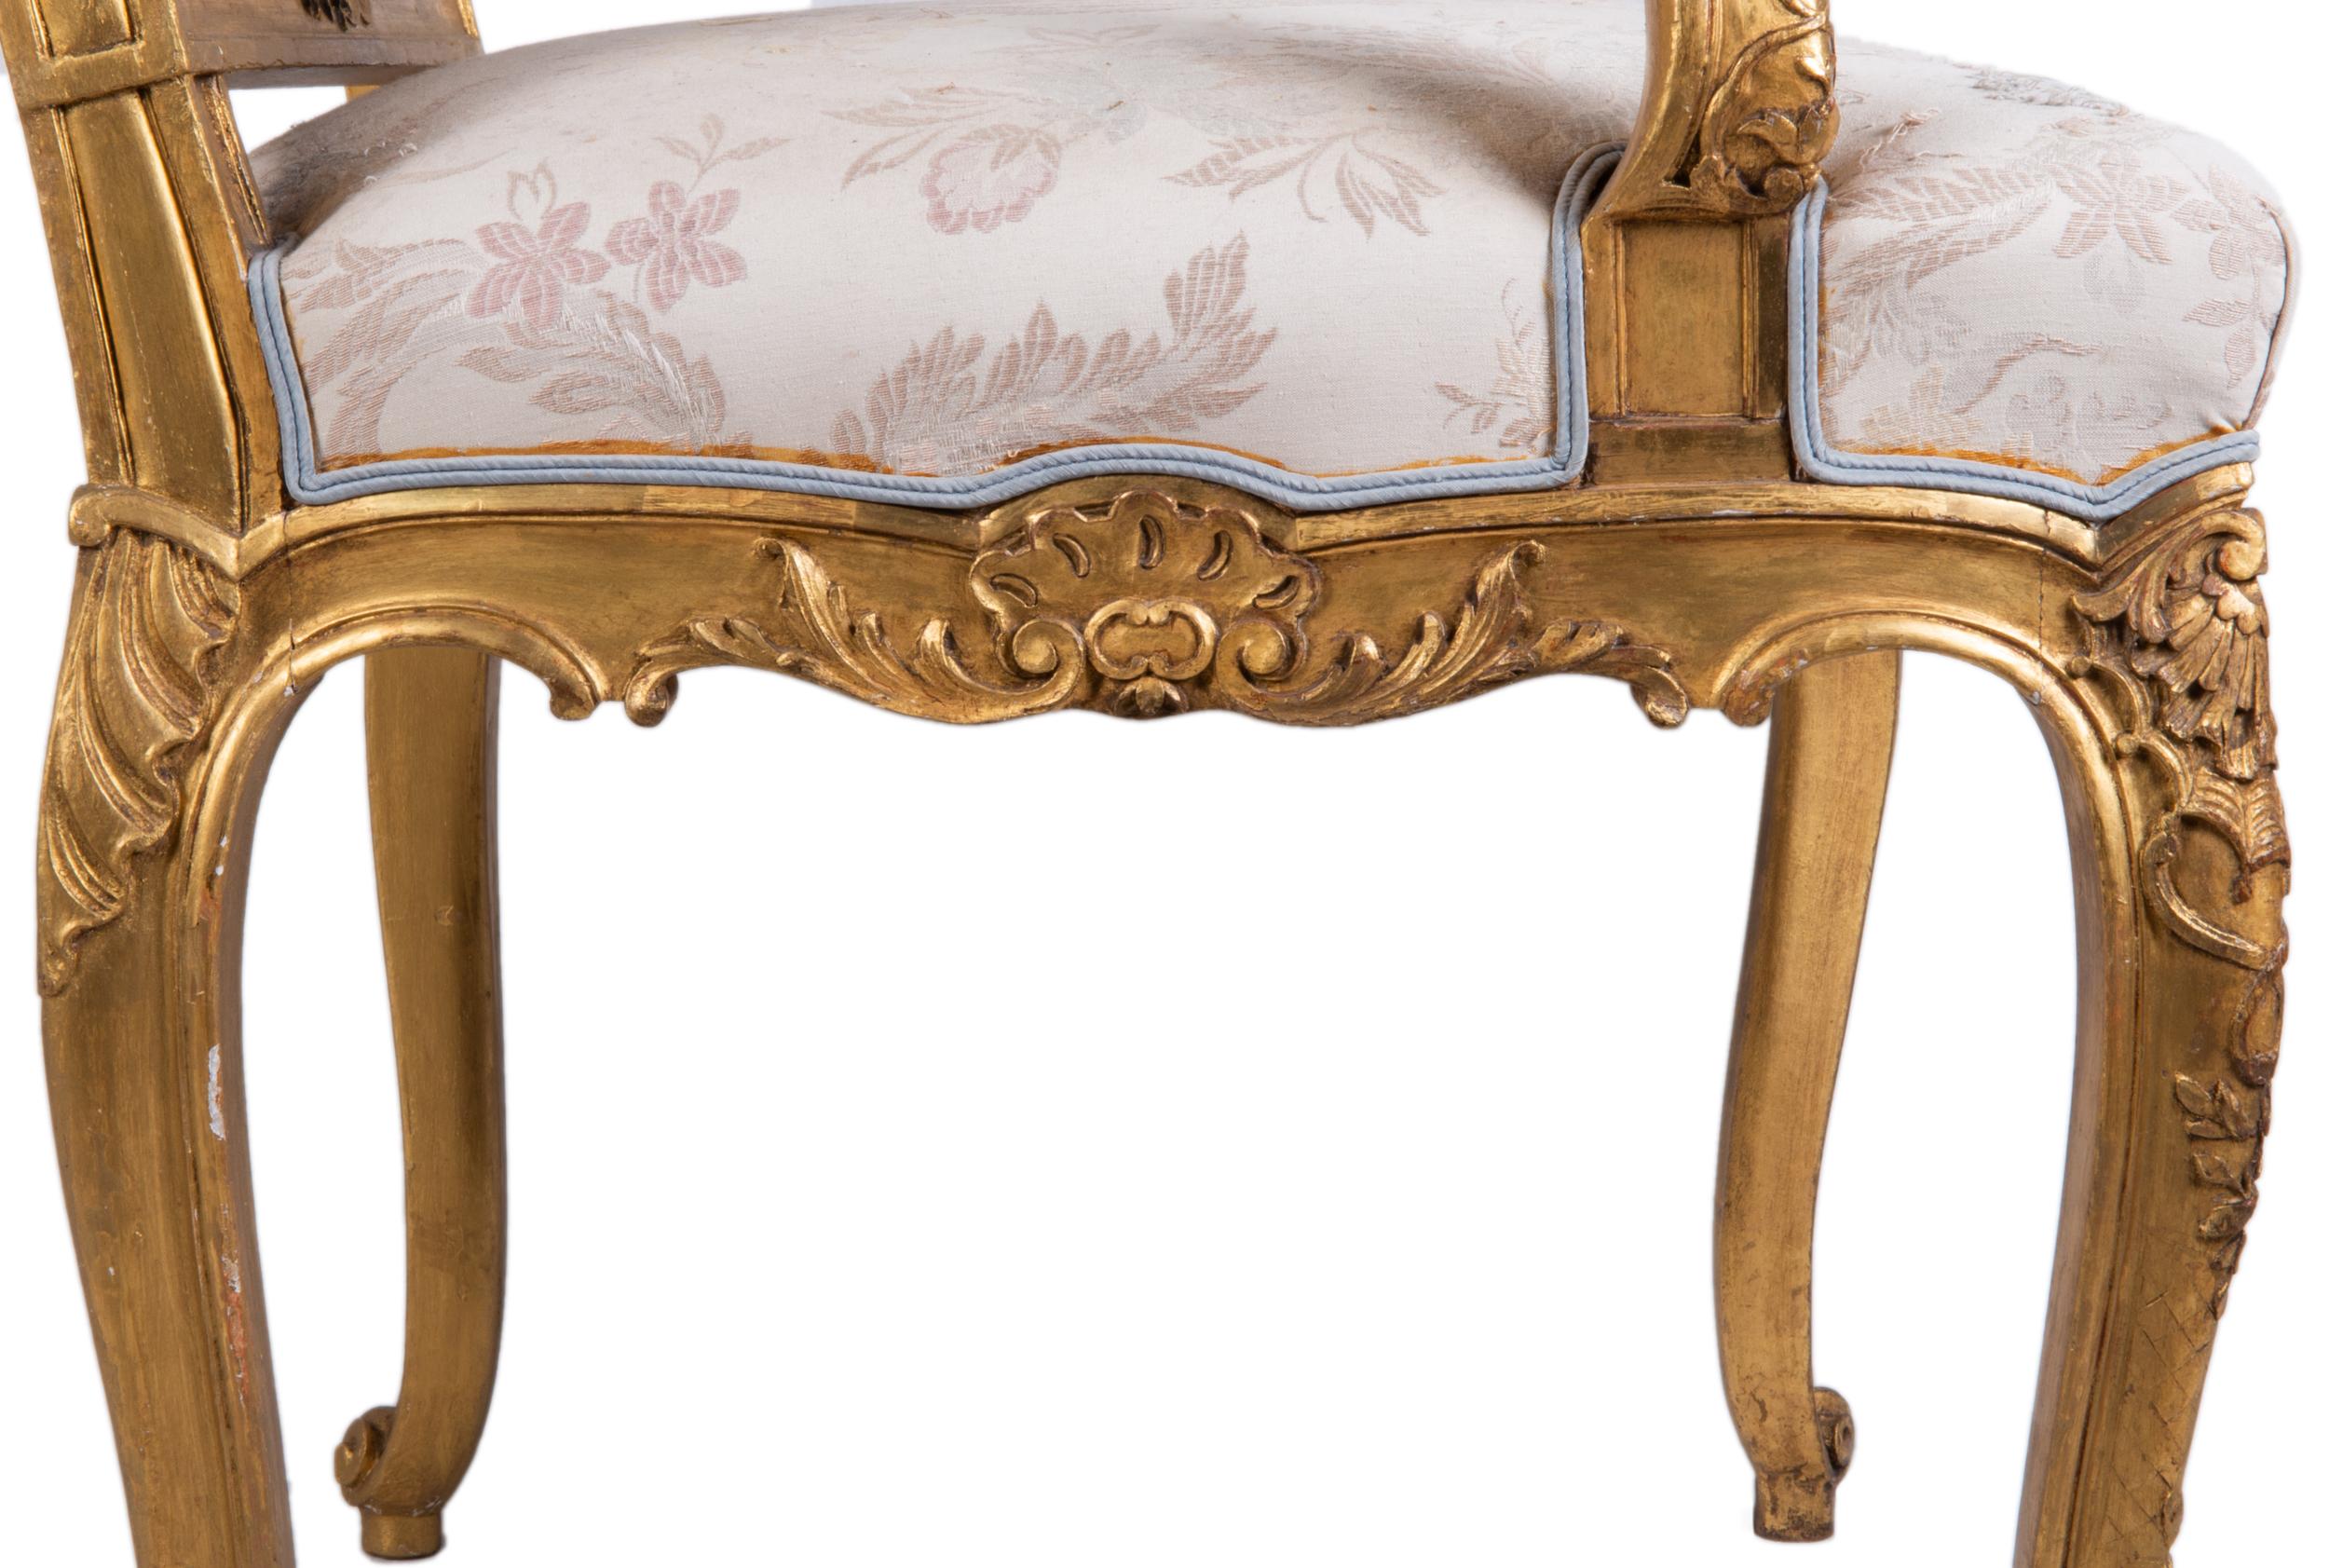 Pair of Louis XVI Style Gilded Armchairs by 'Mellier' In Good Condition For Sale In Brighton, Sussex